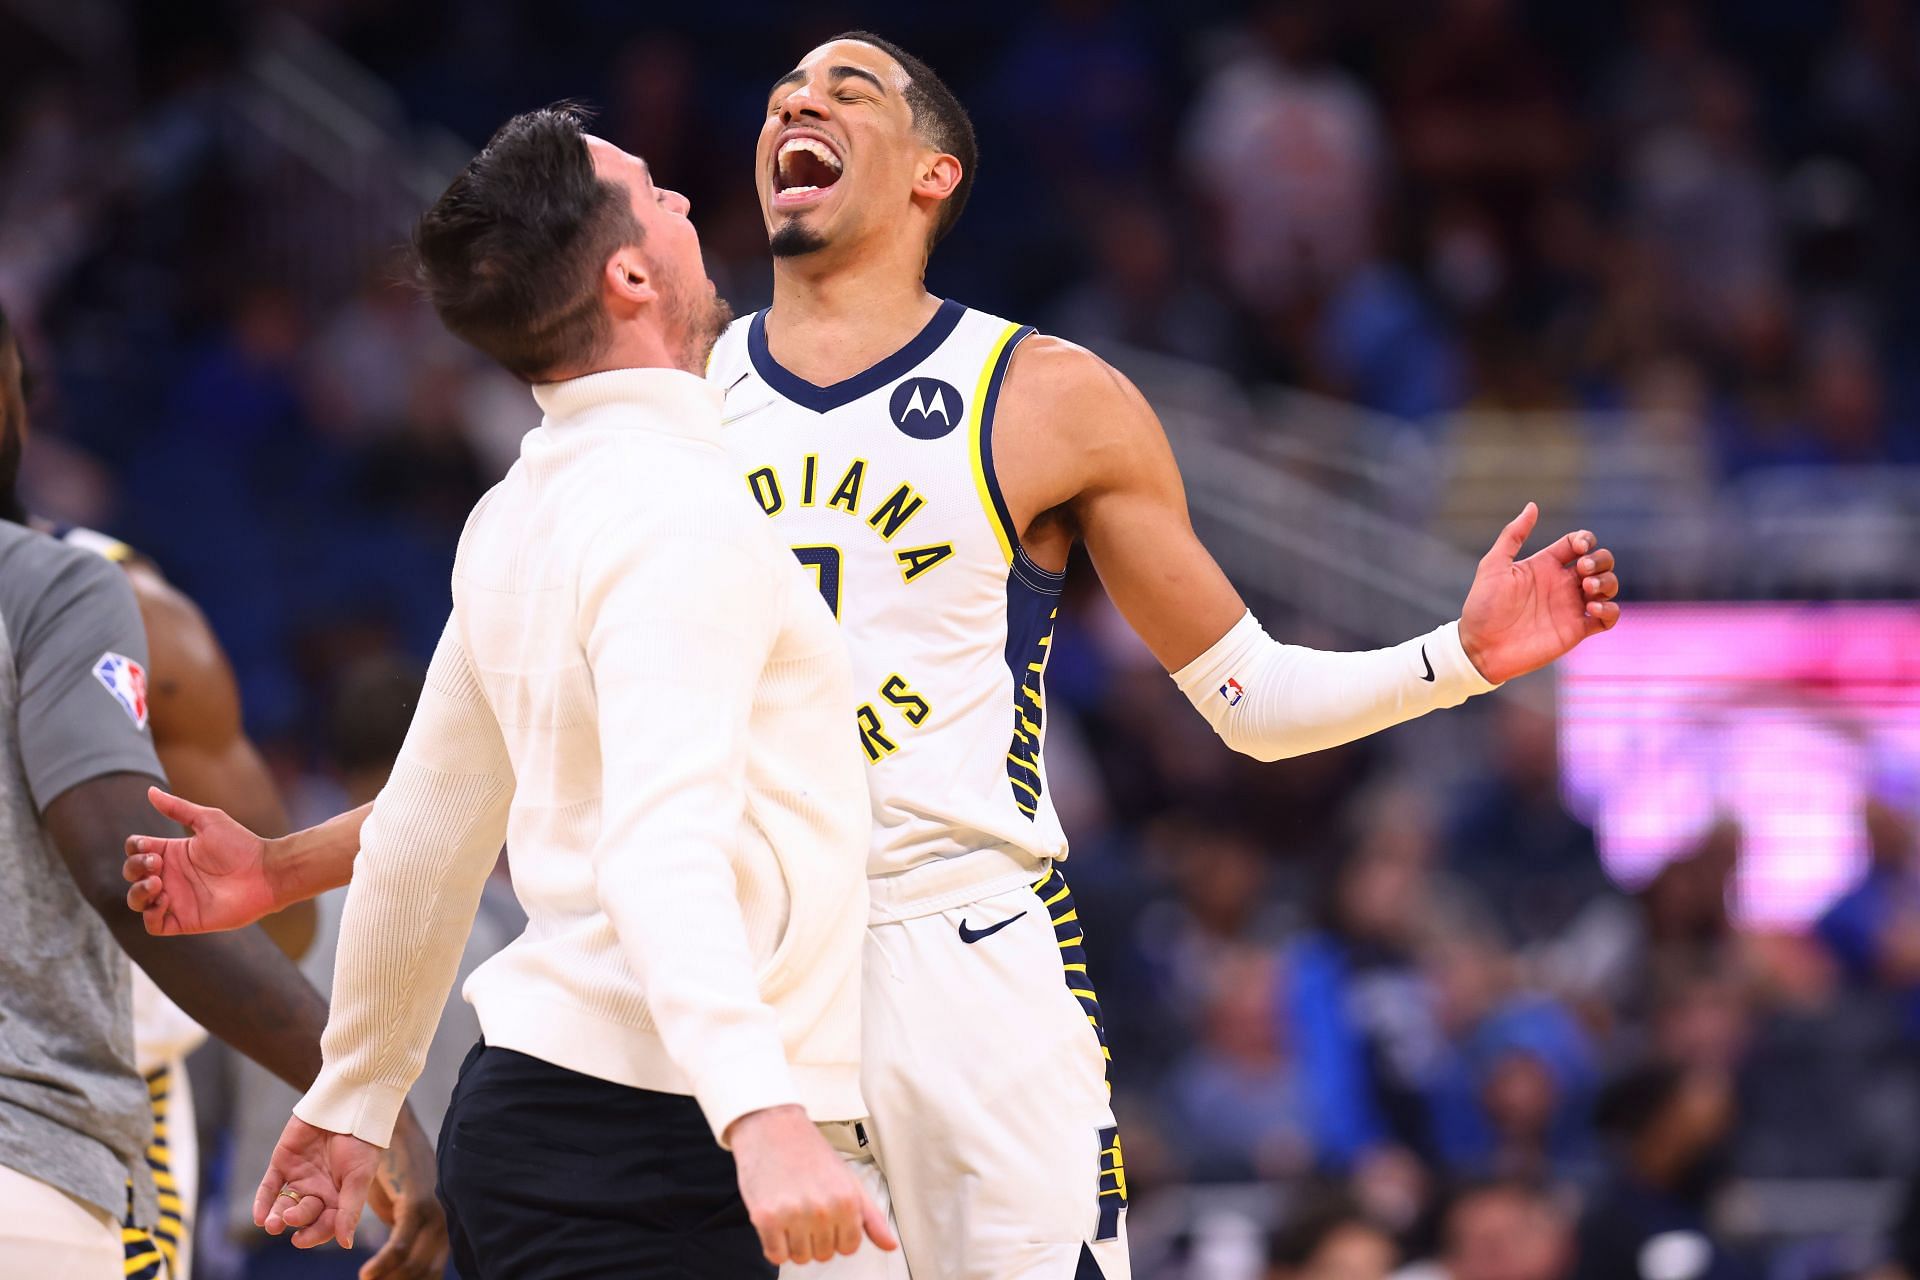 Tyrese Haliburton celebrates a play with TJ McConnell